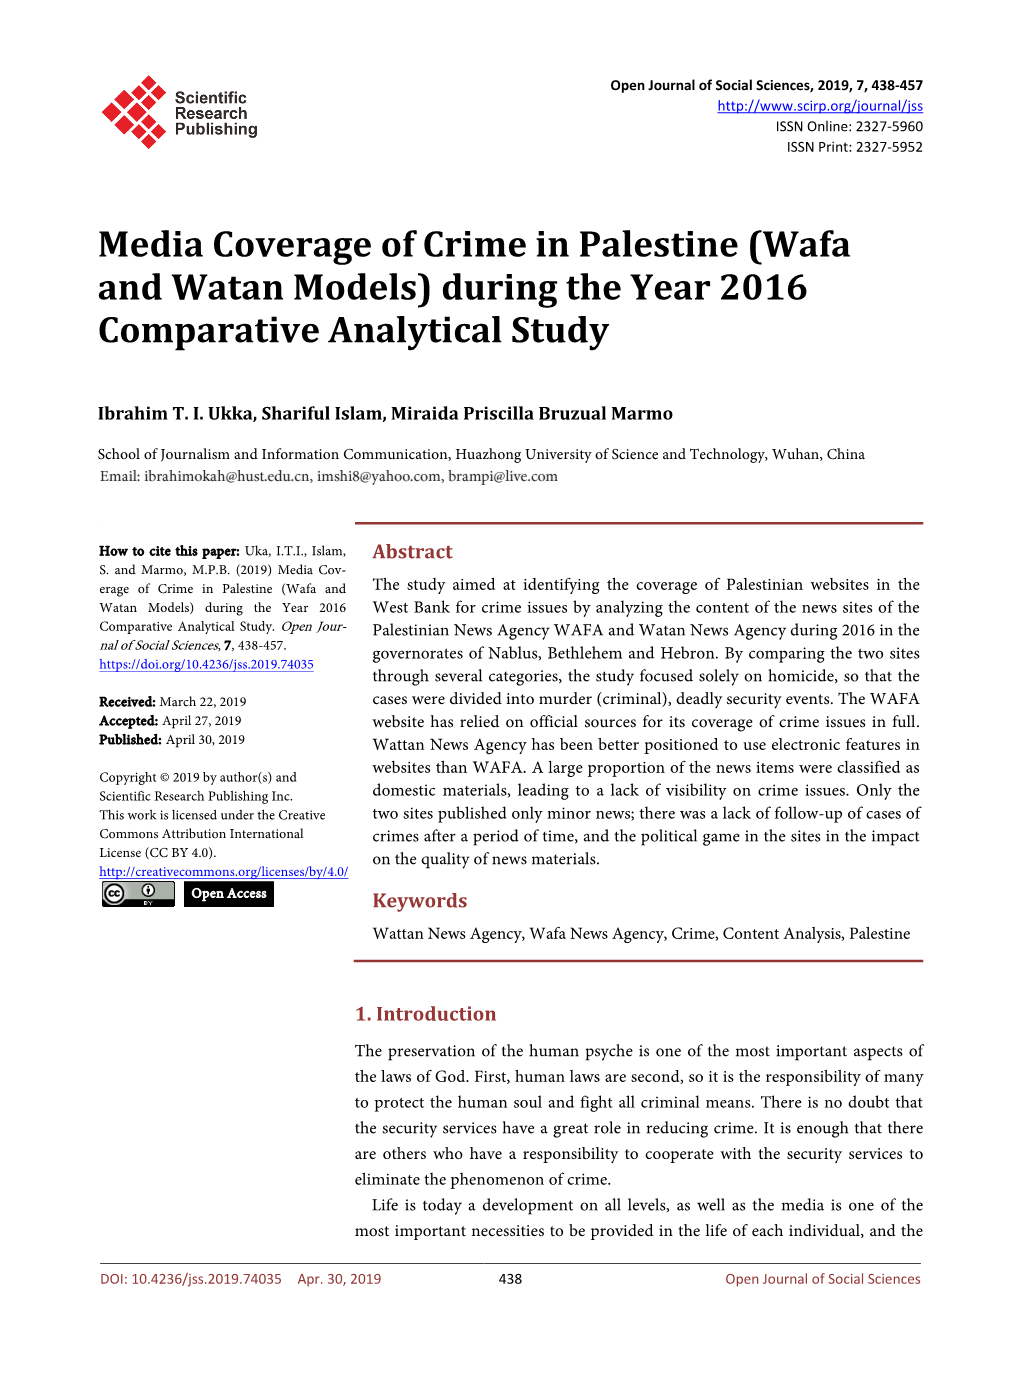 Media Coverage of Crime in Palestine (Wafa and Watan Models) During the Year 2016 Comparative Analytical Study